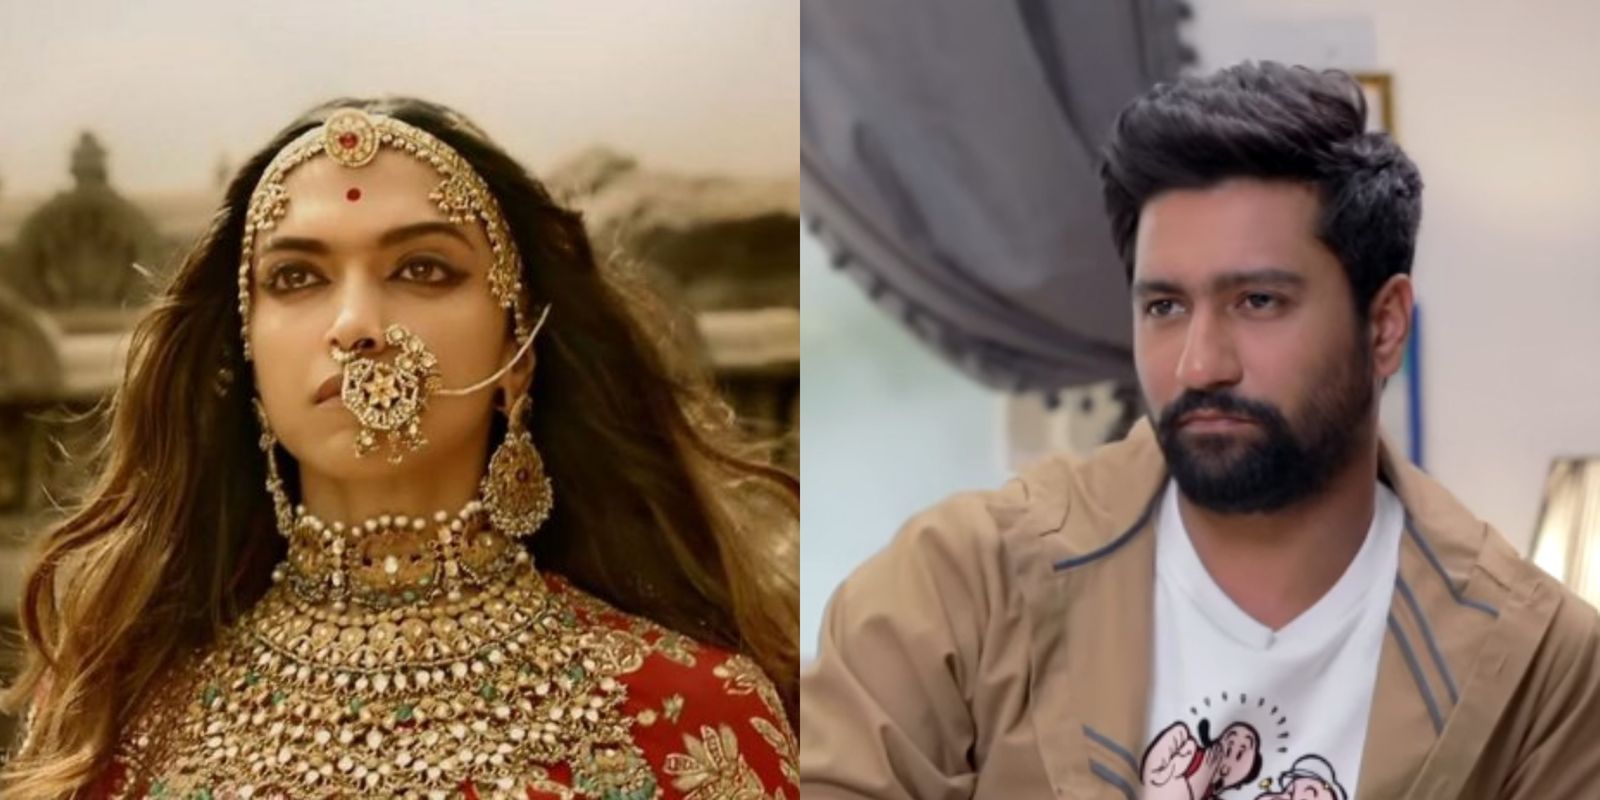 Throwback: Was Deepika Padukone The Reason Behind Vicky Kaushal Being Dropped From Padmaavat?   